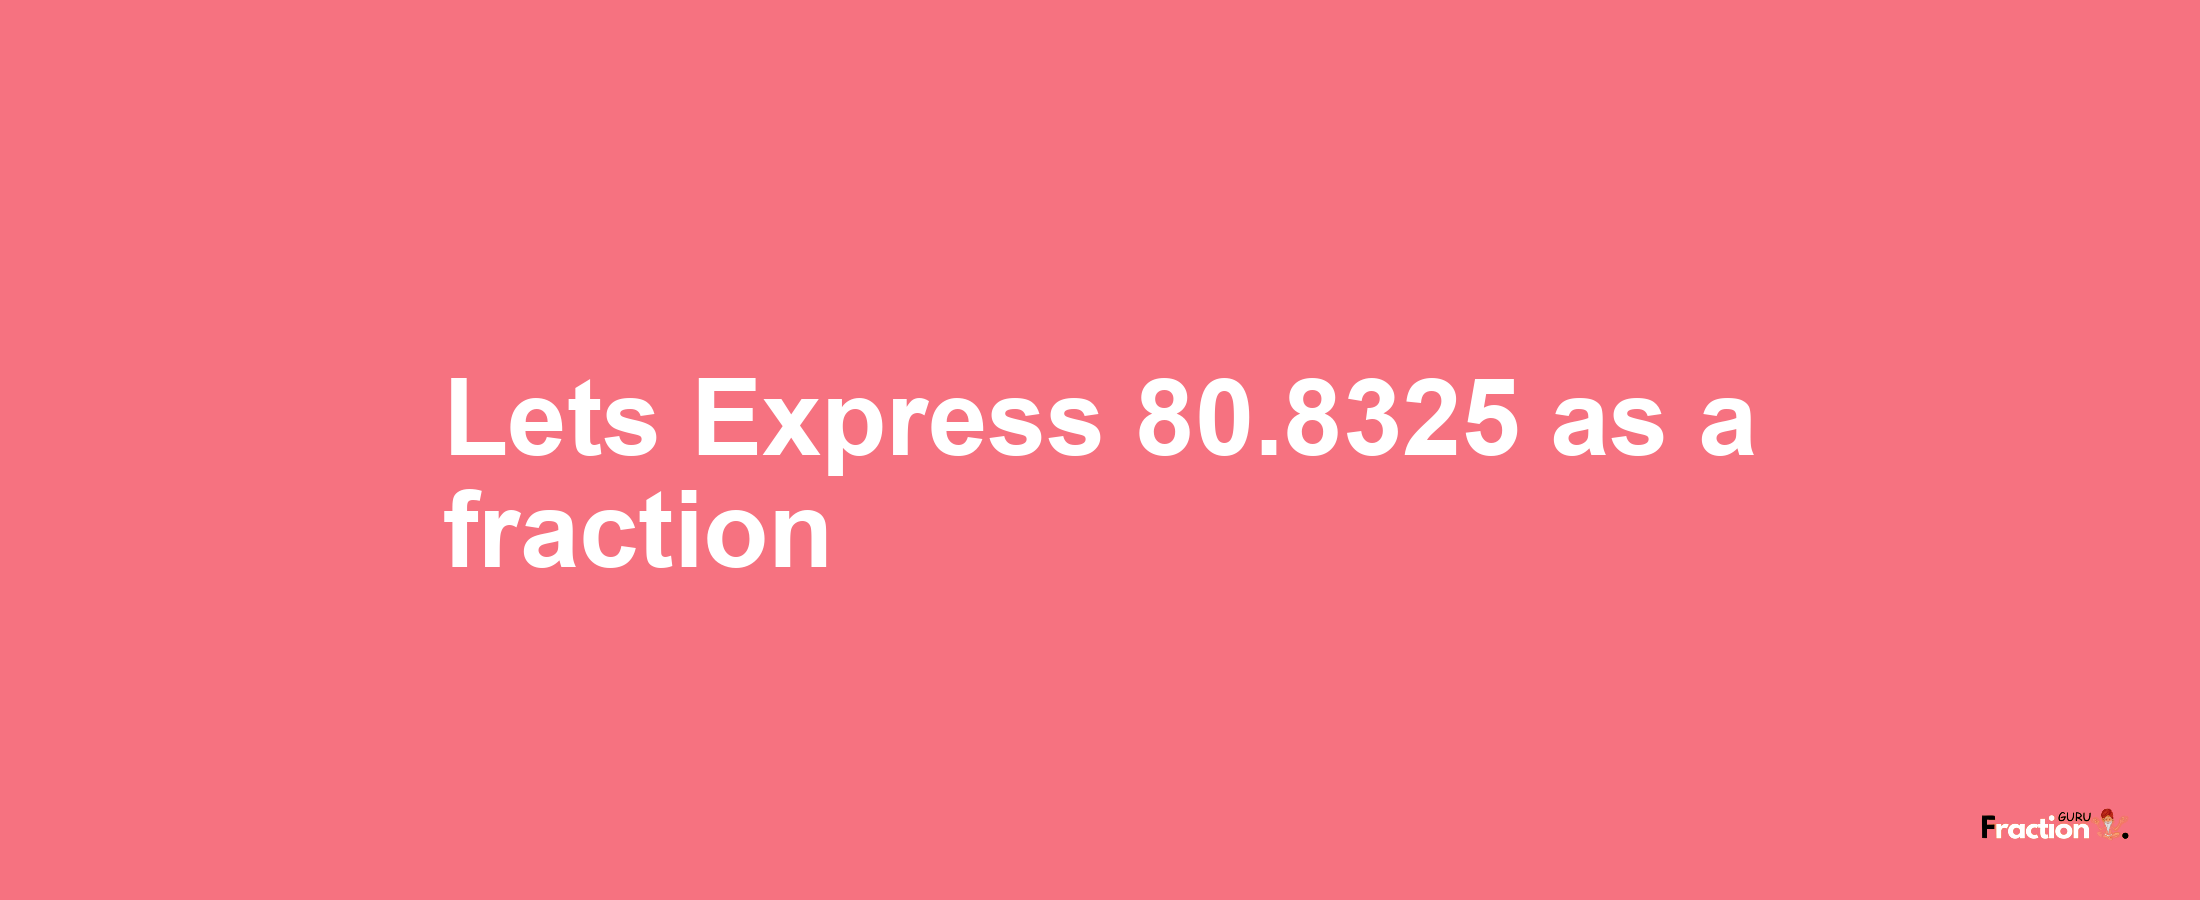 Lets Express 80.8325 as afraction